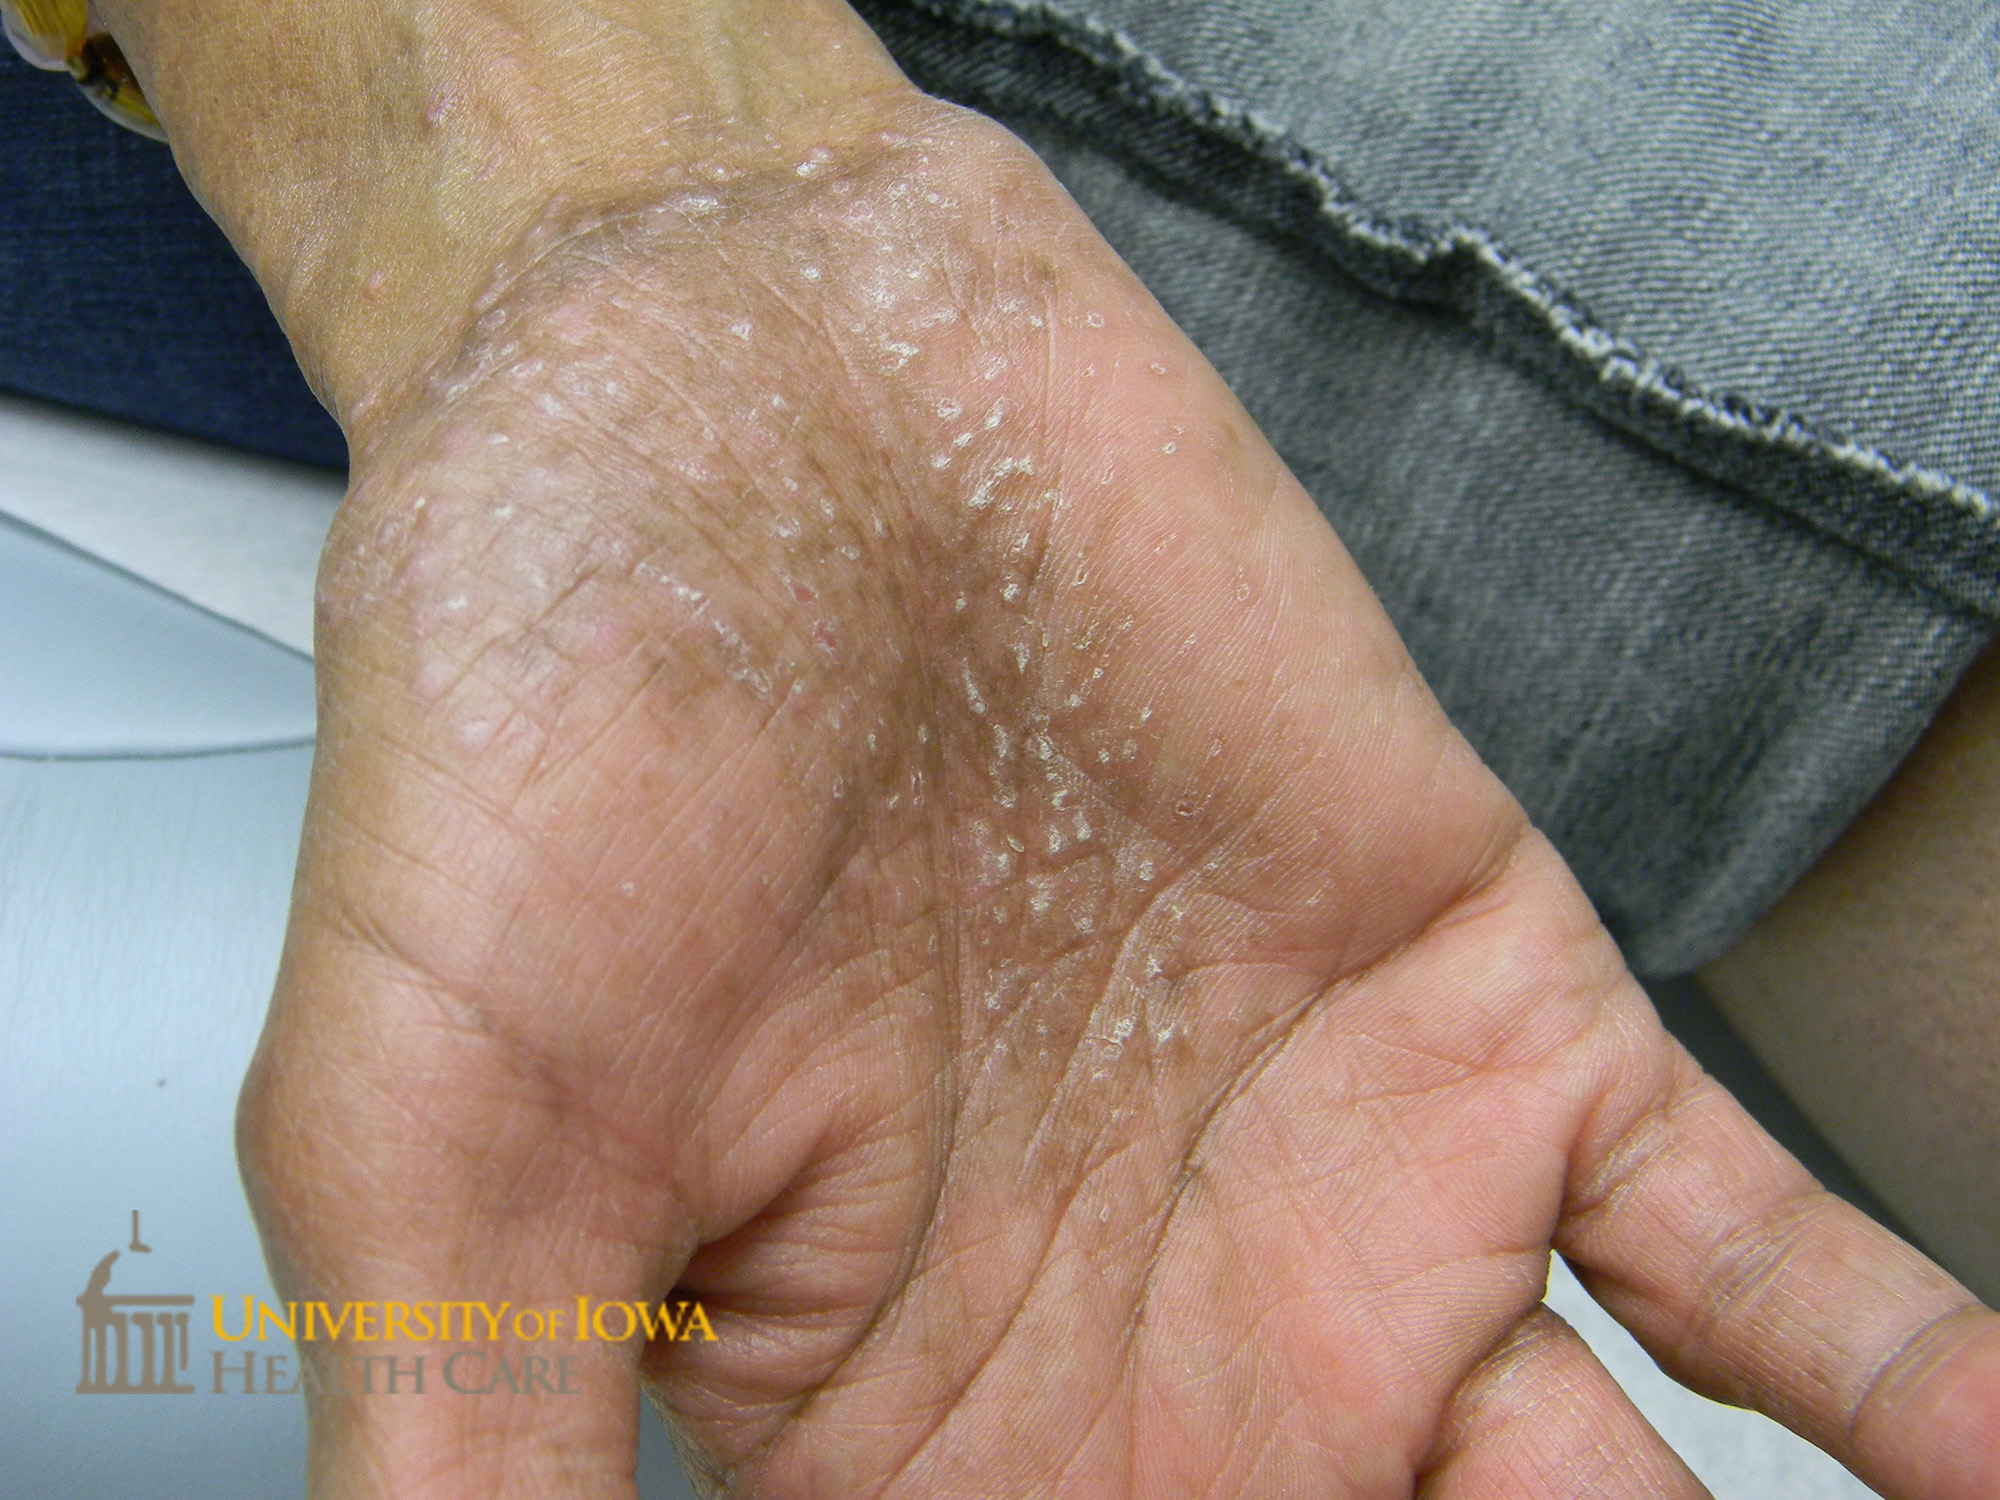 Numrous 2-3 mm brwoin papules with central white scale on the palms. (click images for higher resolution).